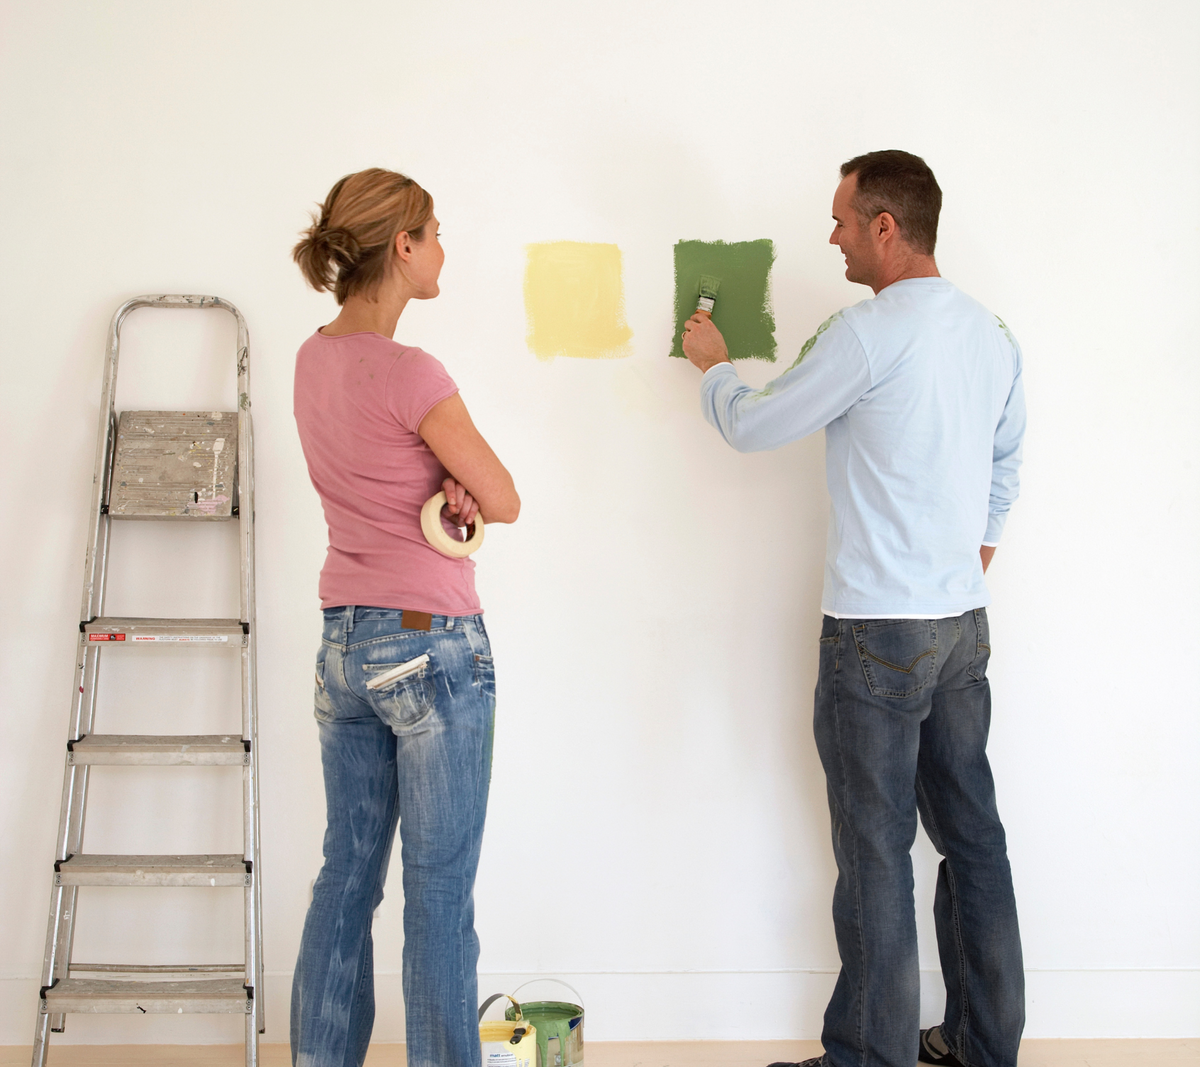 How To Test Out Paint Colours So You Don't Get Stuck With A Wall You Hate